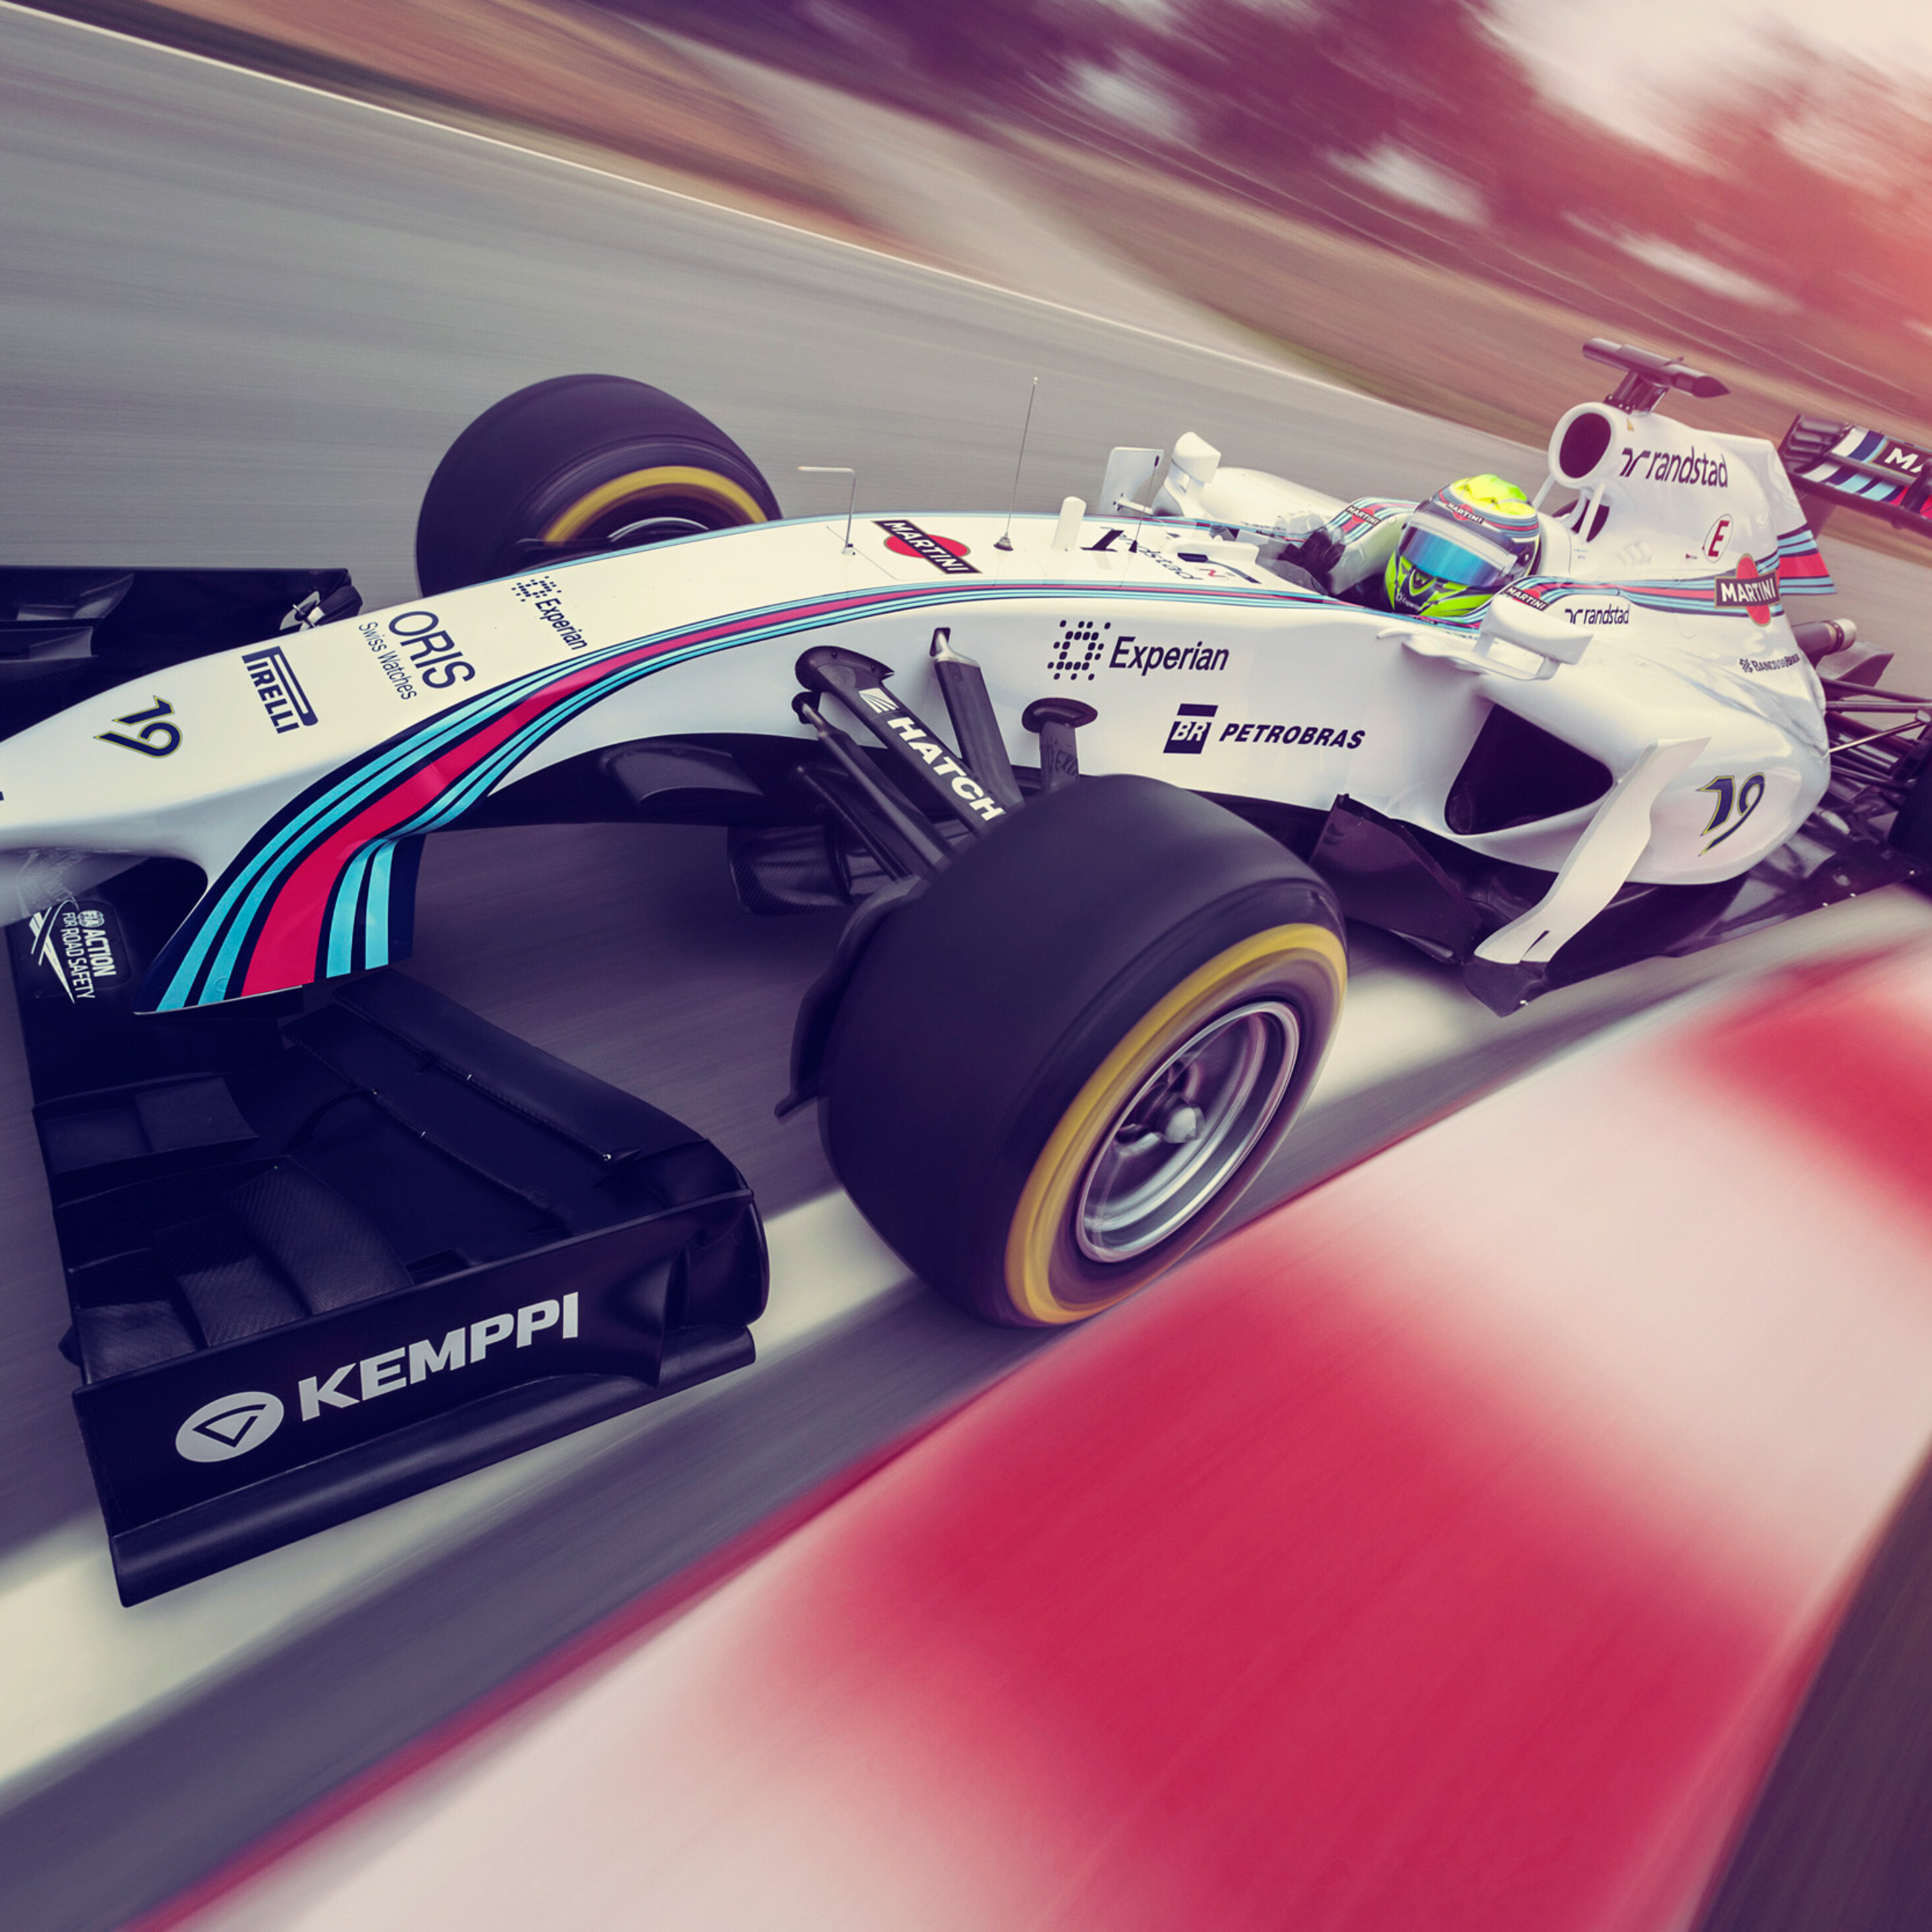 f1-wallpapers. cars-wallpapers. track-wallpapers. hd-wallpapers. artist-wal...